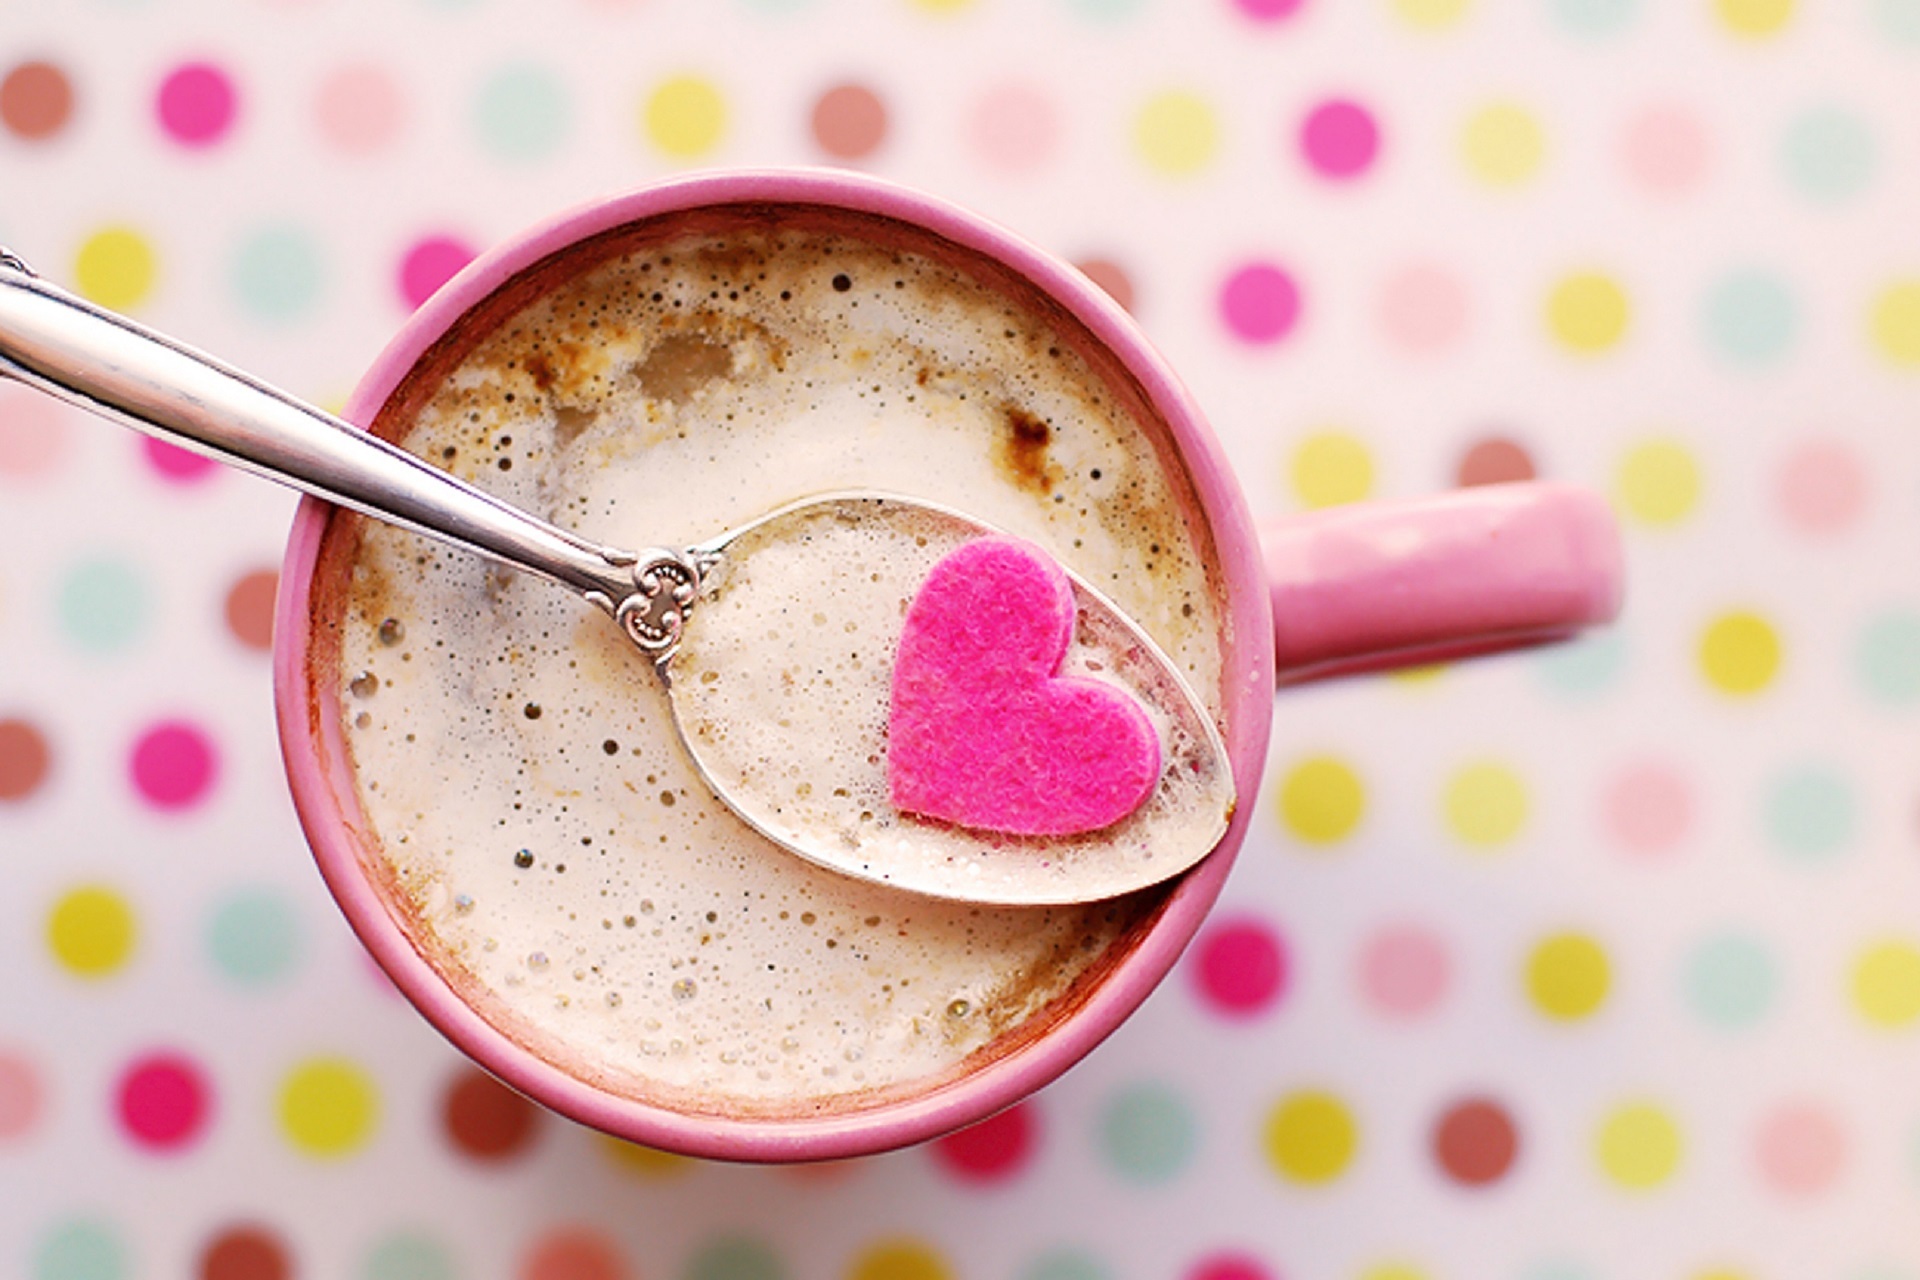 Image: Frothy coffee with heart on a spoon